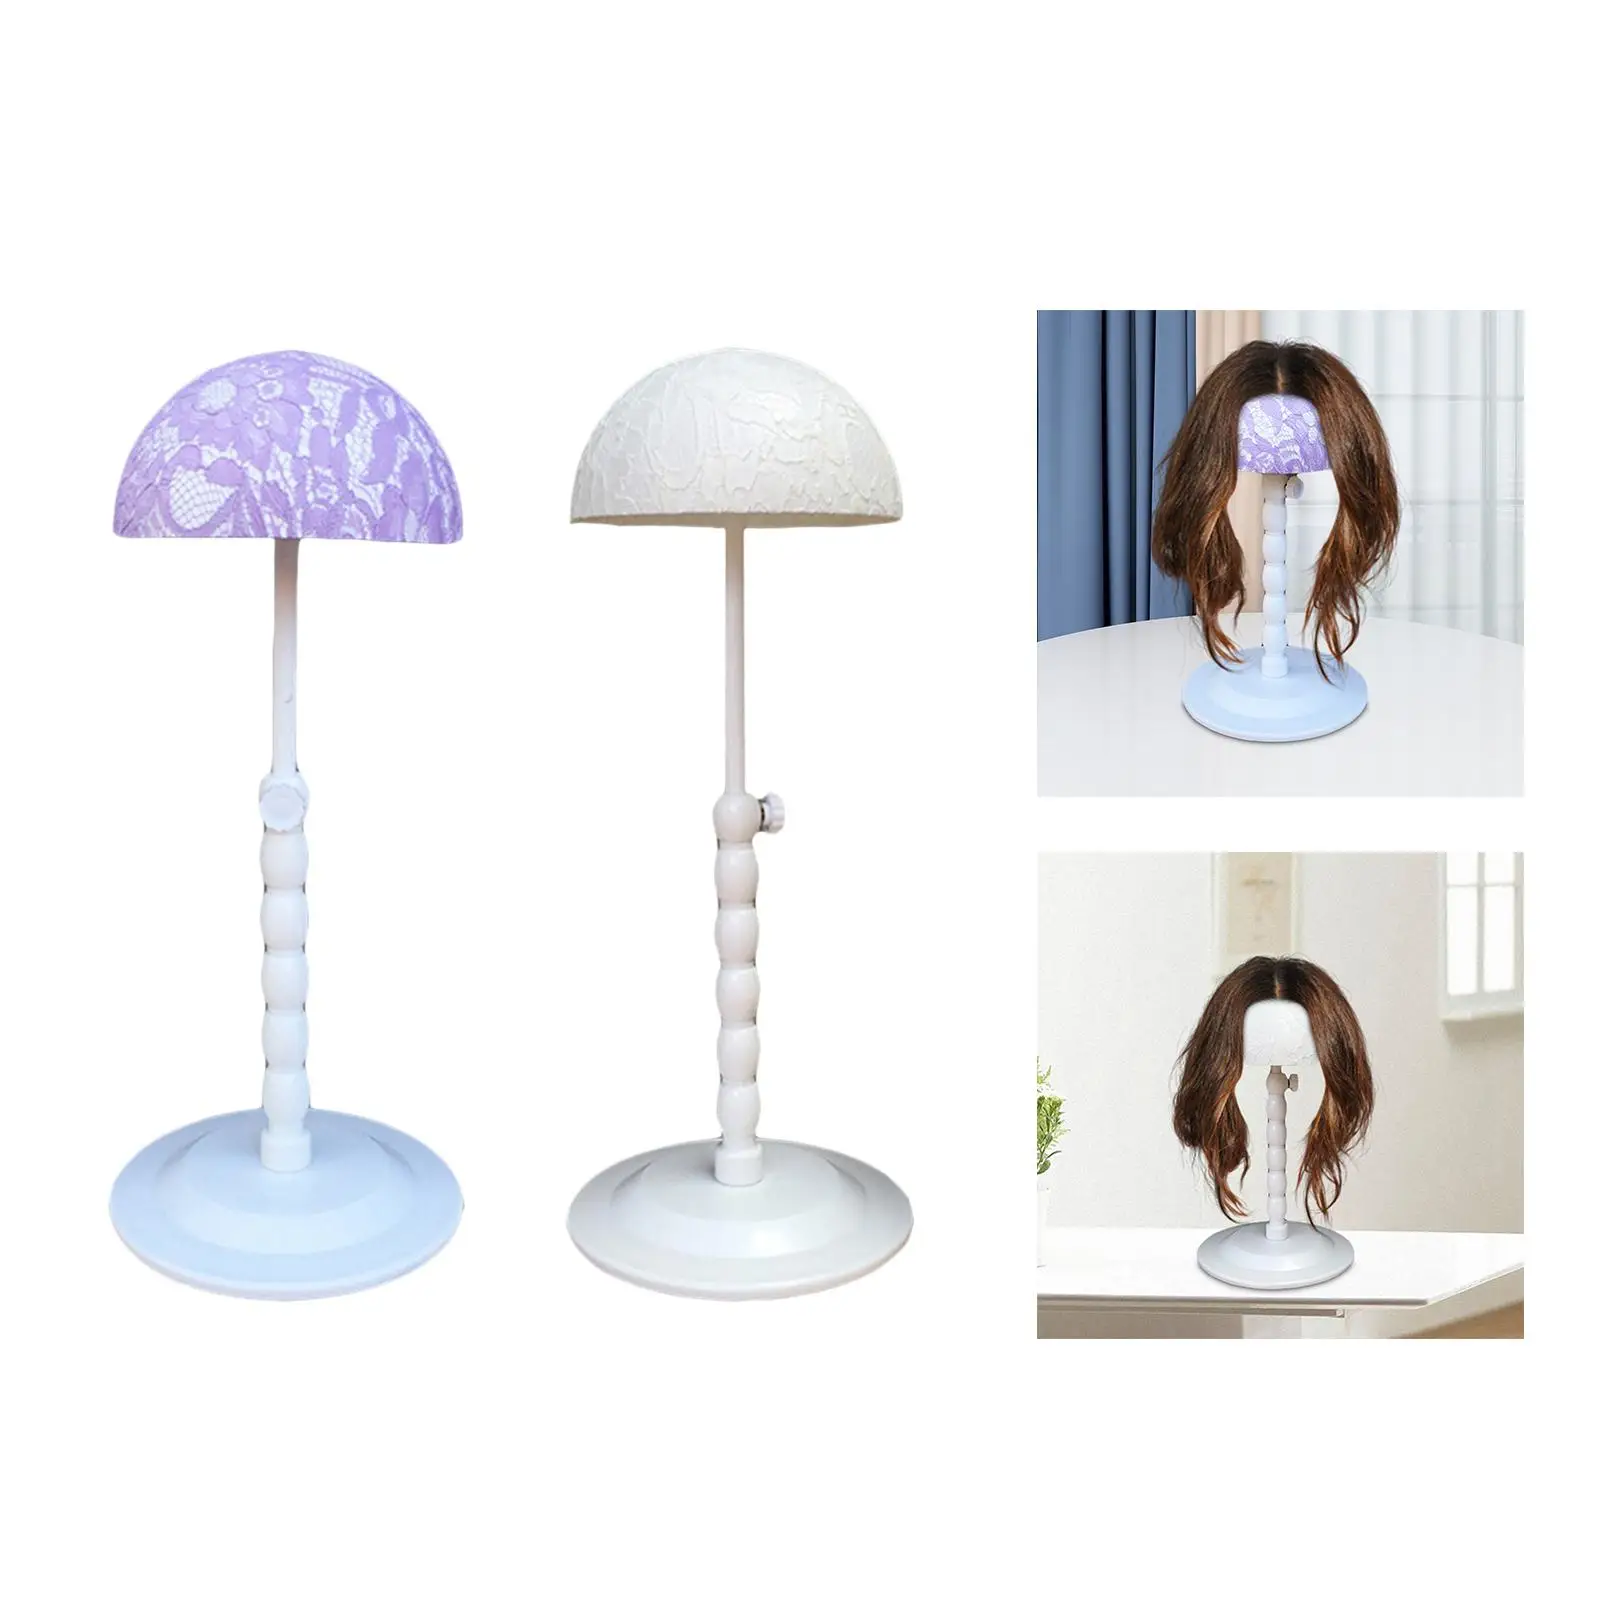 Wig Stand Adjustable Height Portable Stable Lightweight No Slip Hat Display Stand Wig Holder for Home Shop Drying Styling Travel